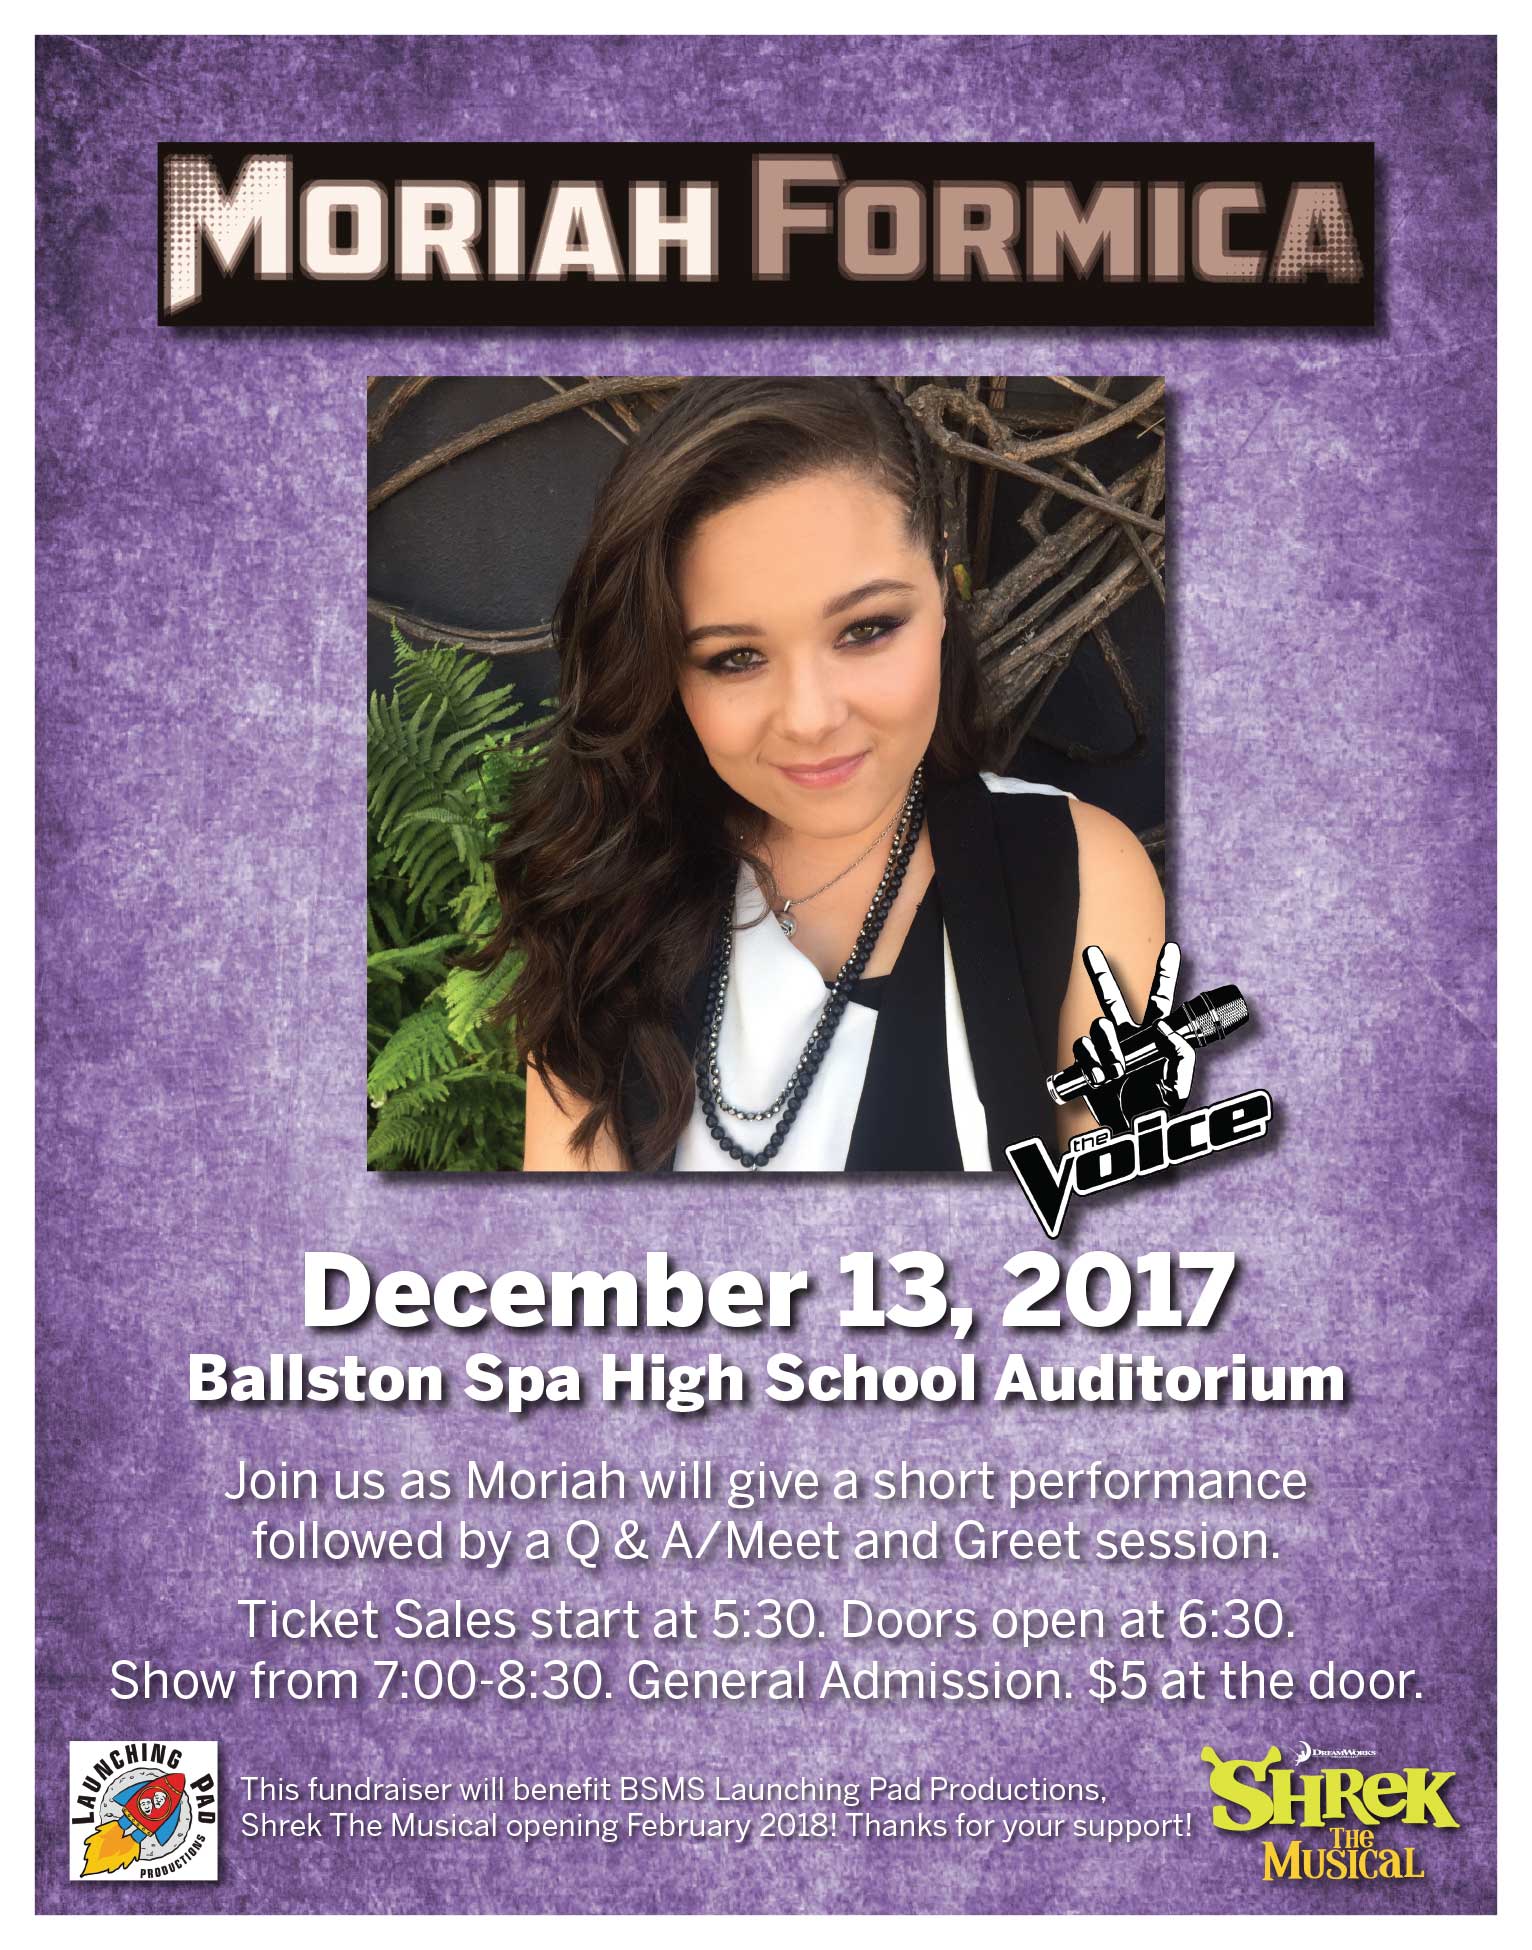 Image of Moriah Formica fundraiser poster for Launching Pad Productions at the Ballston Spa Middle School in Ballston Spa, New York.